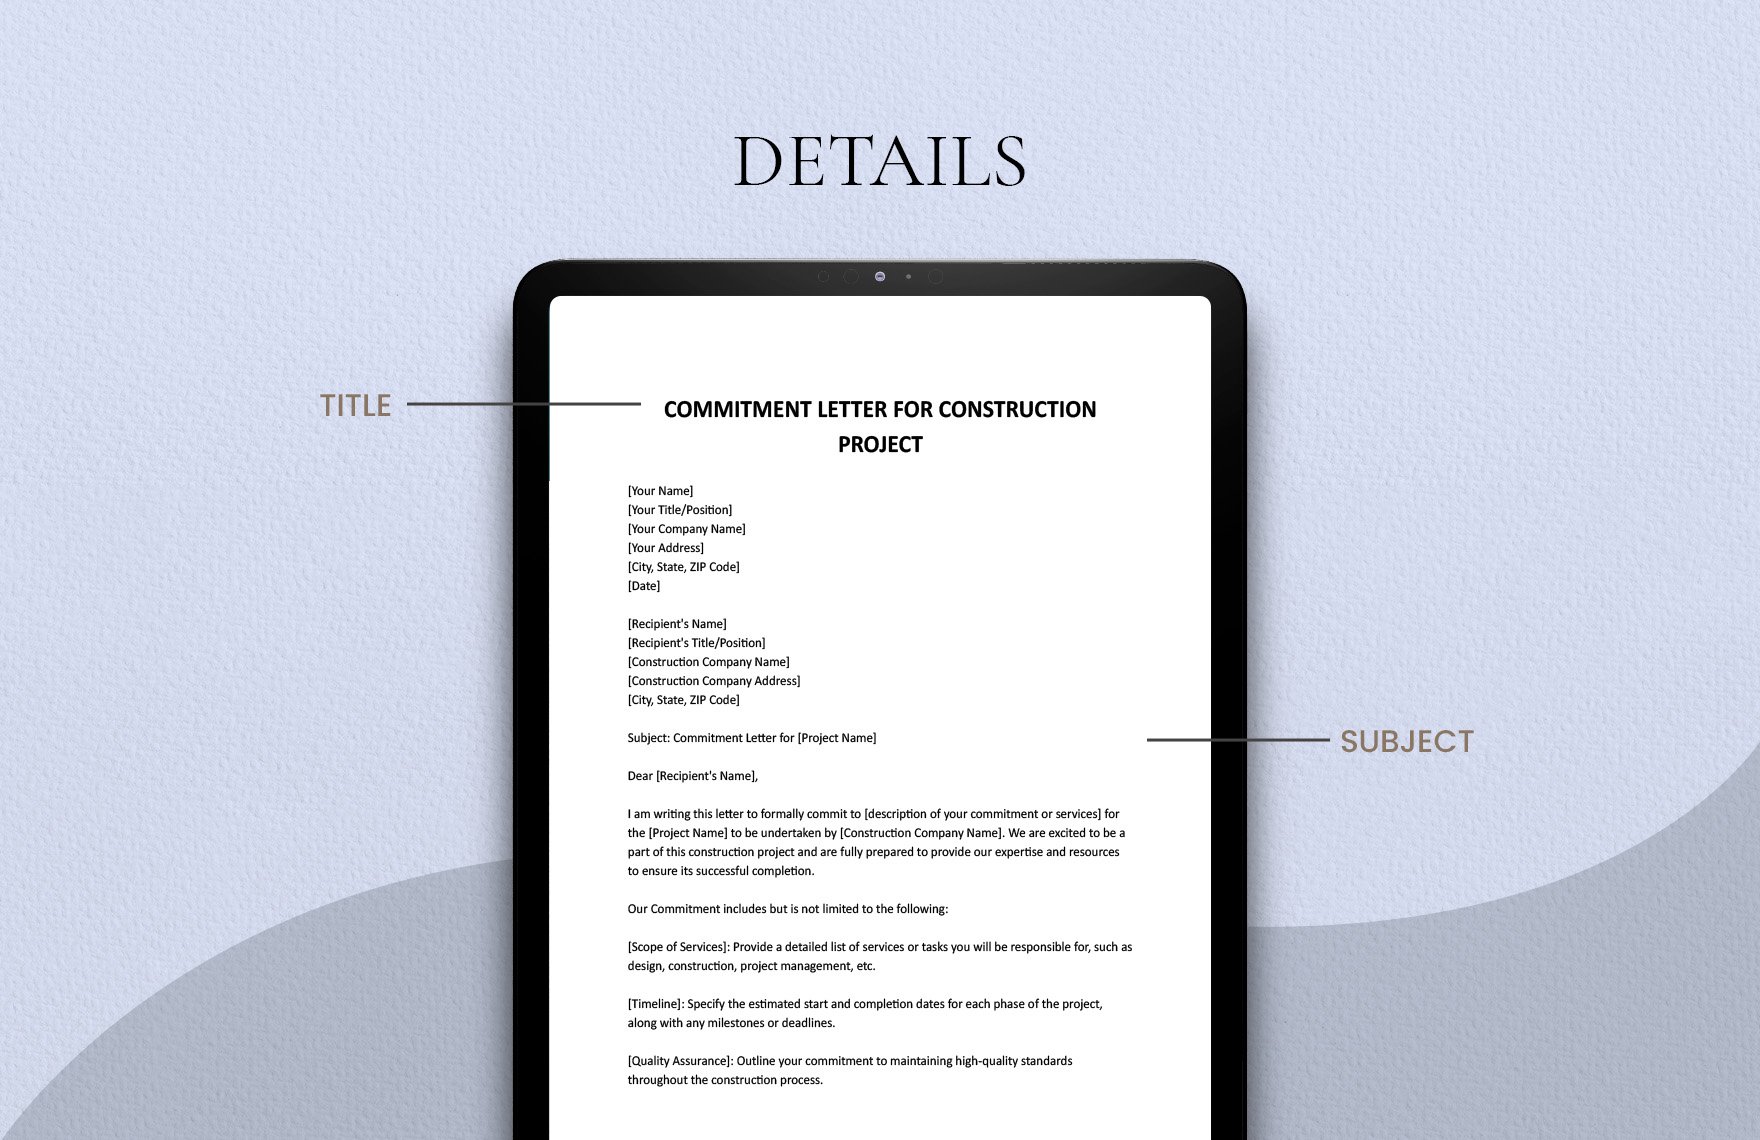 Commitment Letter For Construction Project